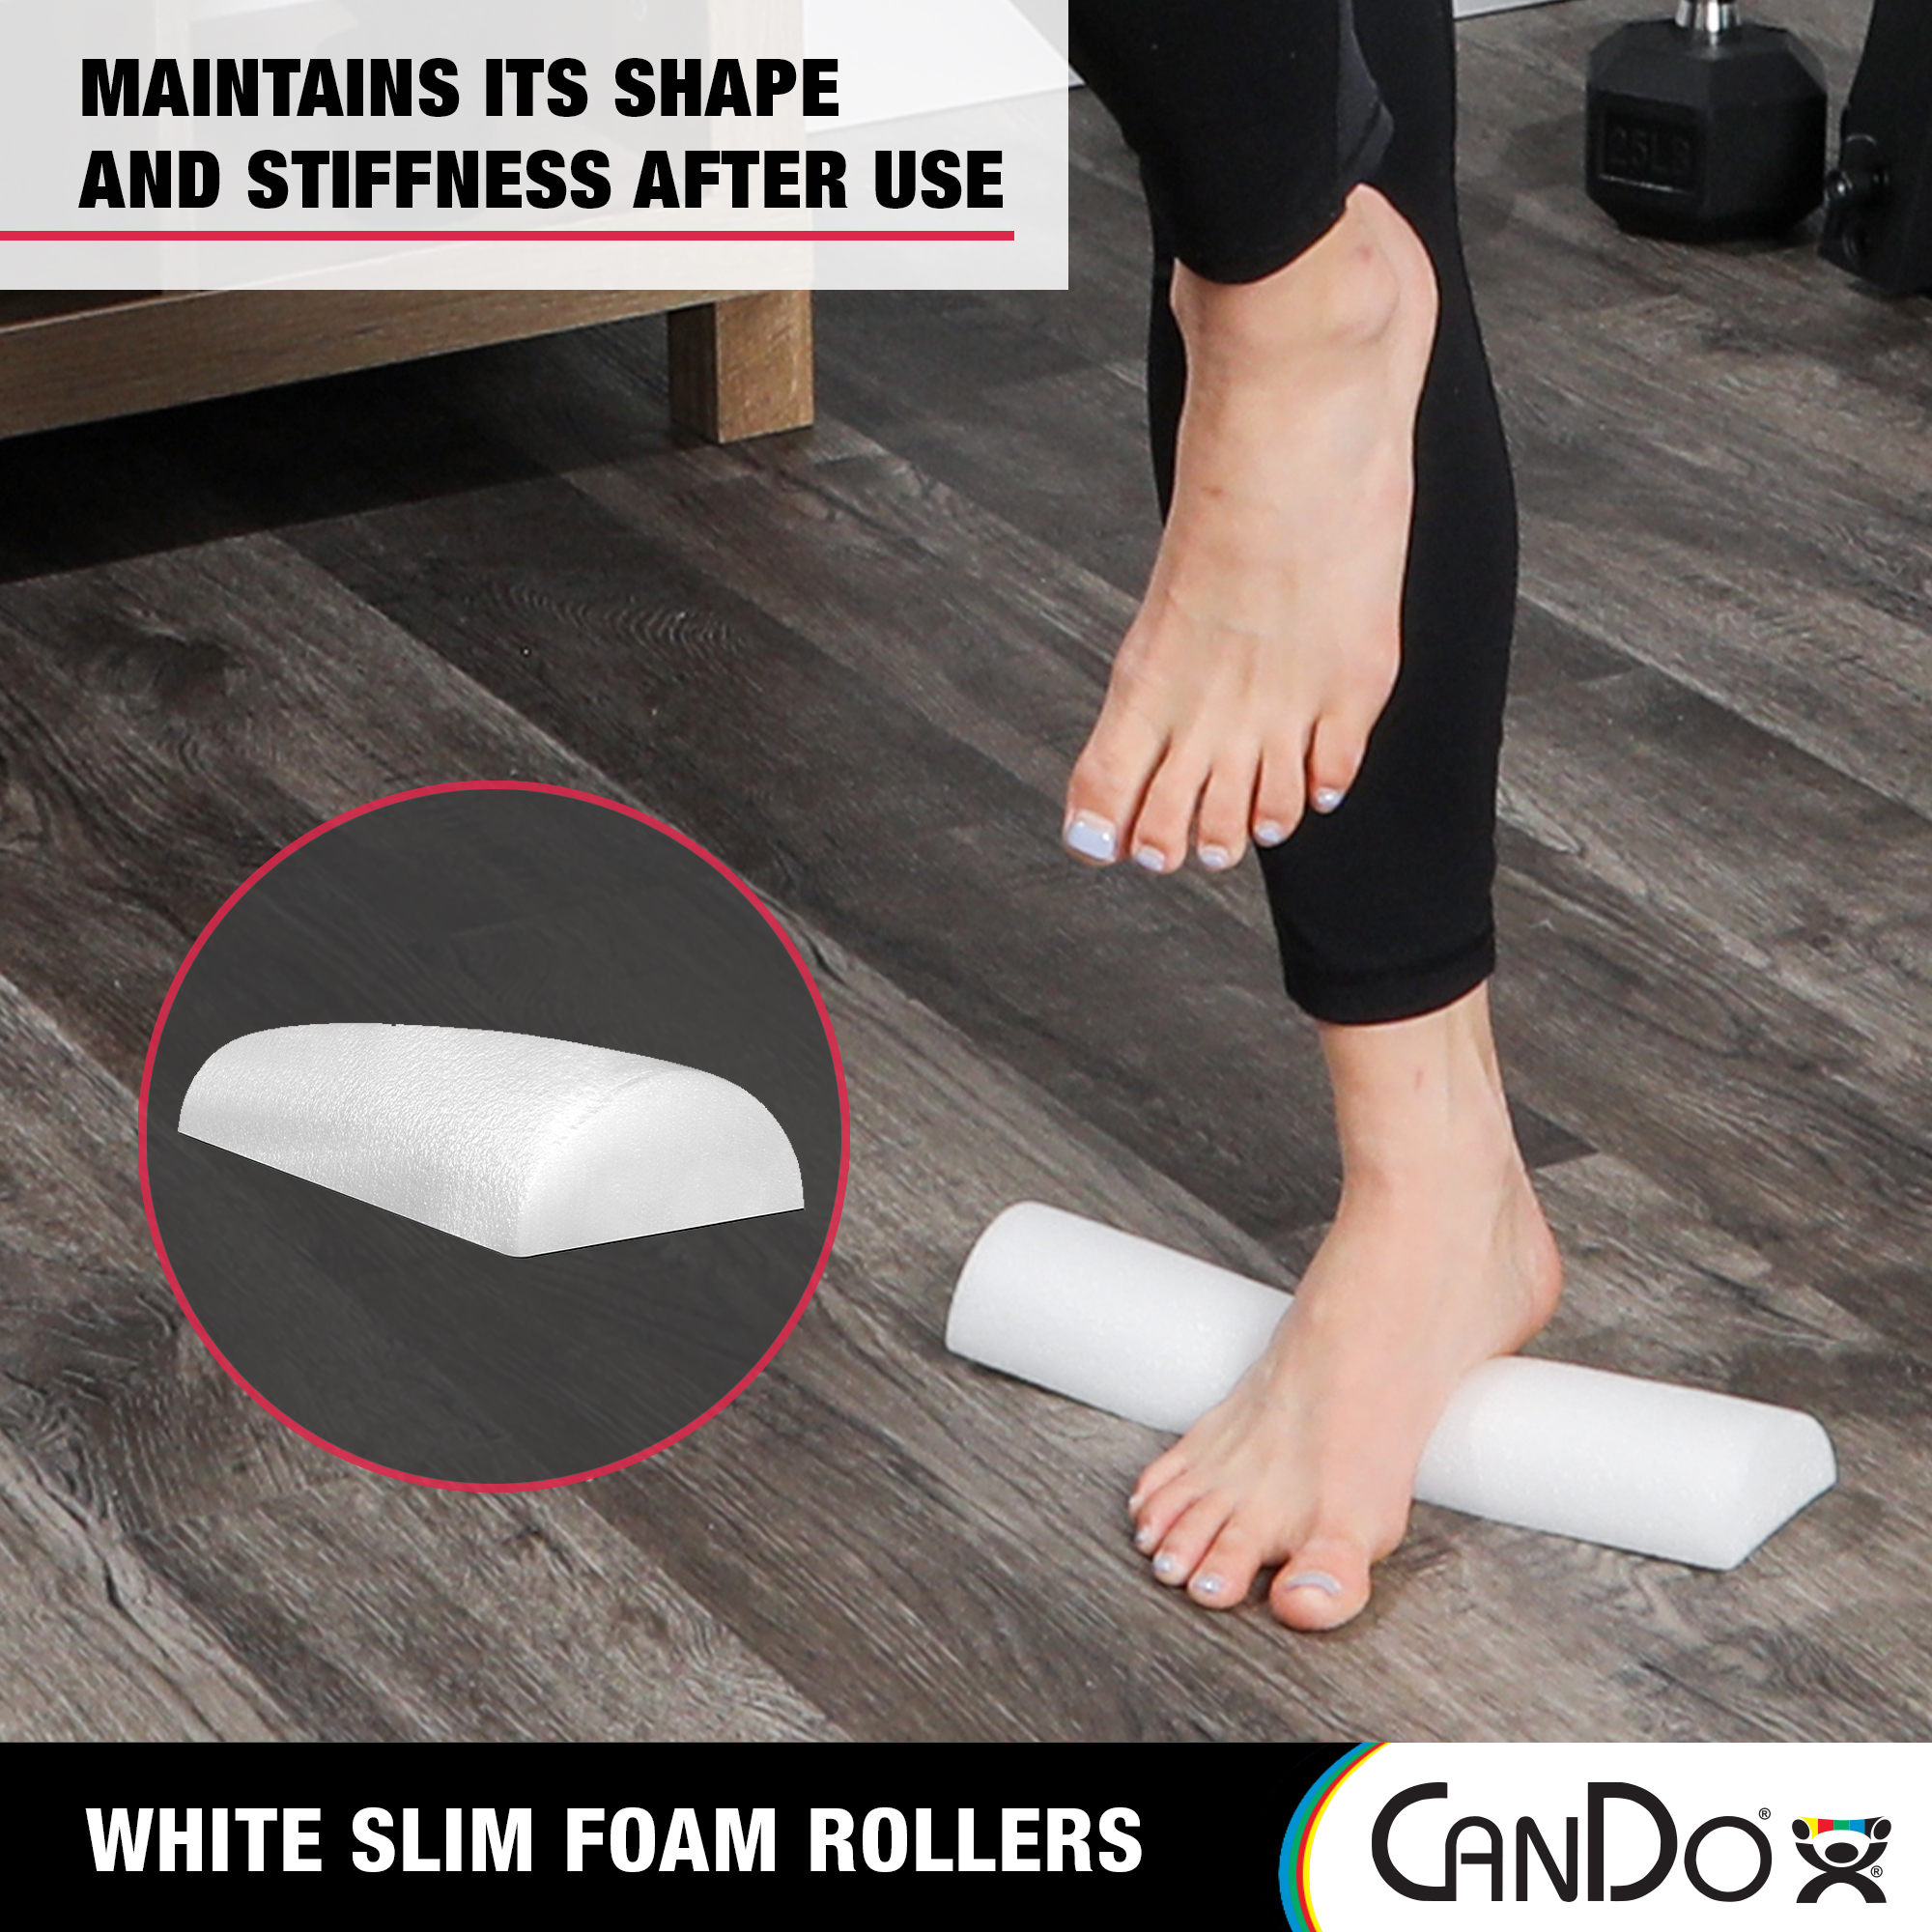 CanDo Slim White PE Foam Rollers for Exercise, Fitness, Muscle Restoration, Massage Therapy, Sport Recovery and Physical Therapy for Home, Clinics, Professional Therapy 3" x 36" Half-Round - image 5 of 6